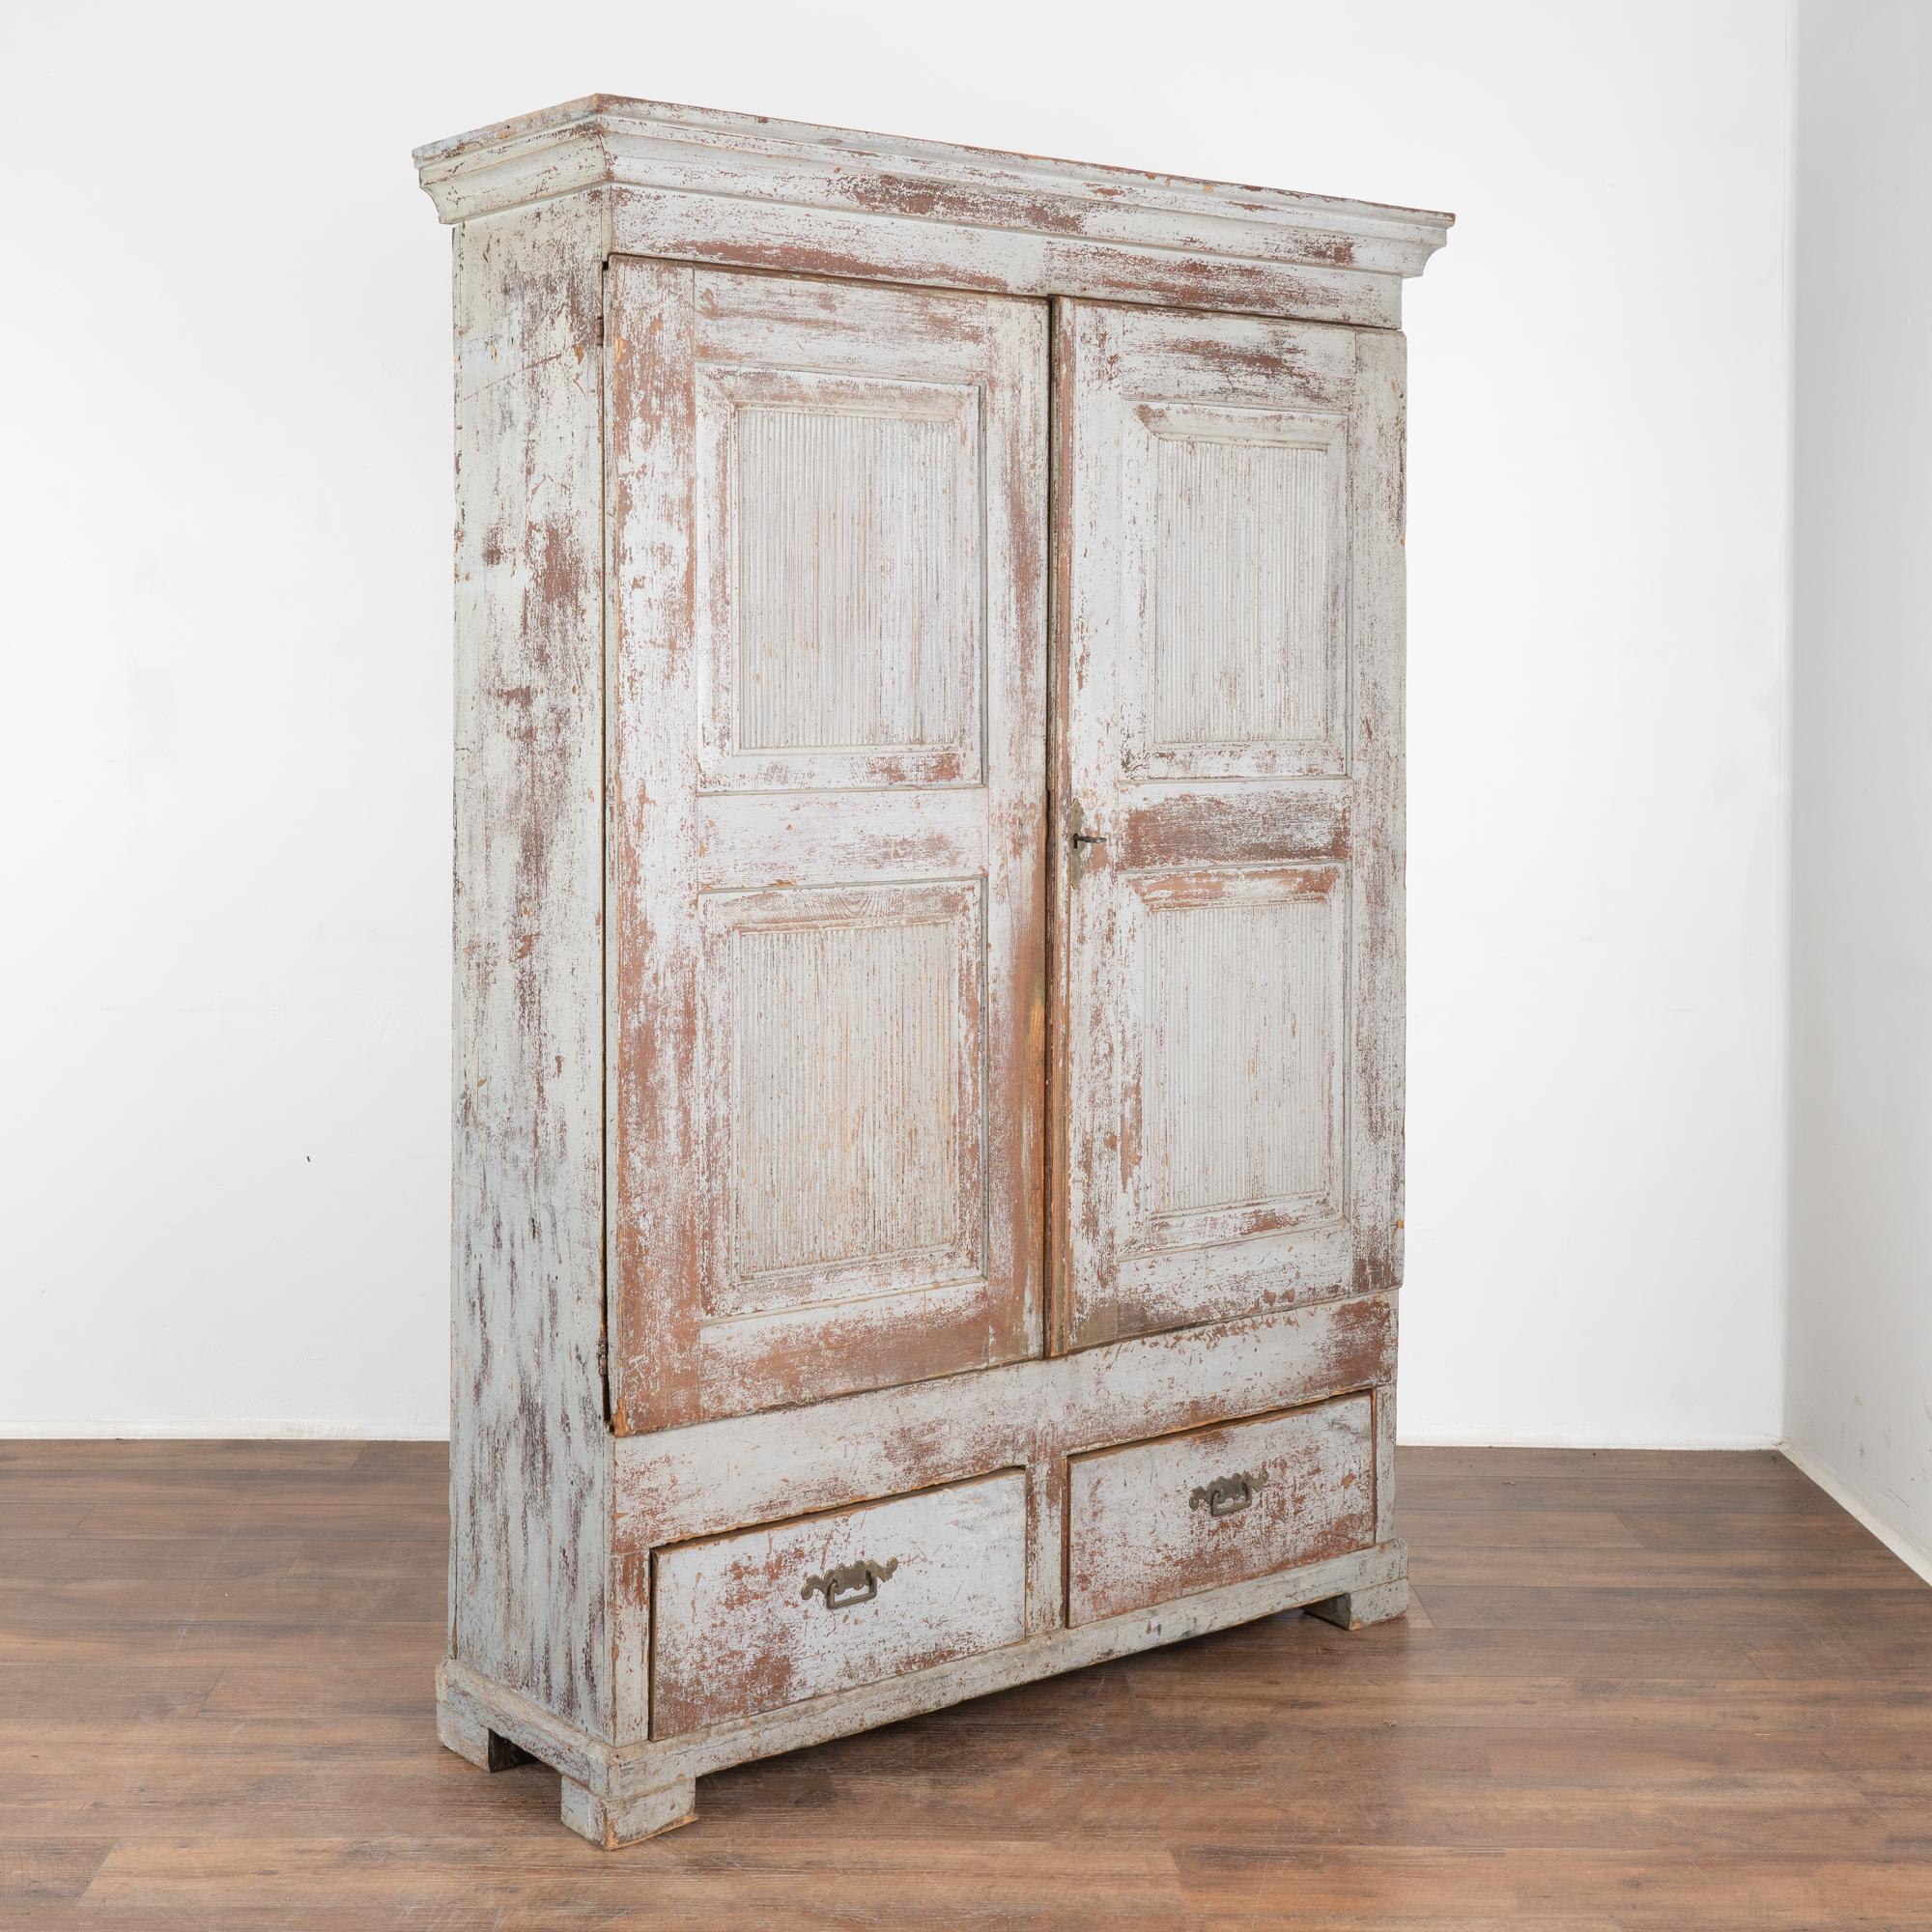 Original blue painted Gustavian armoire or large cupboard from Sweden, early 1800's.
Two cabinet doors with fluted carved panel doors over two functioning drawers, stands over 6.5' tall.
The original blue hand-painted finish has been gently